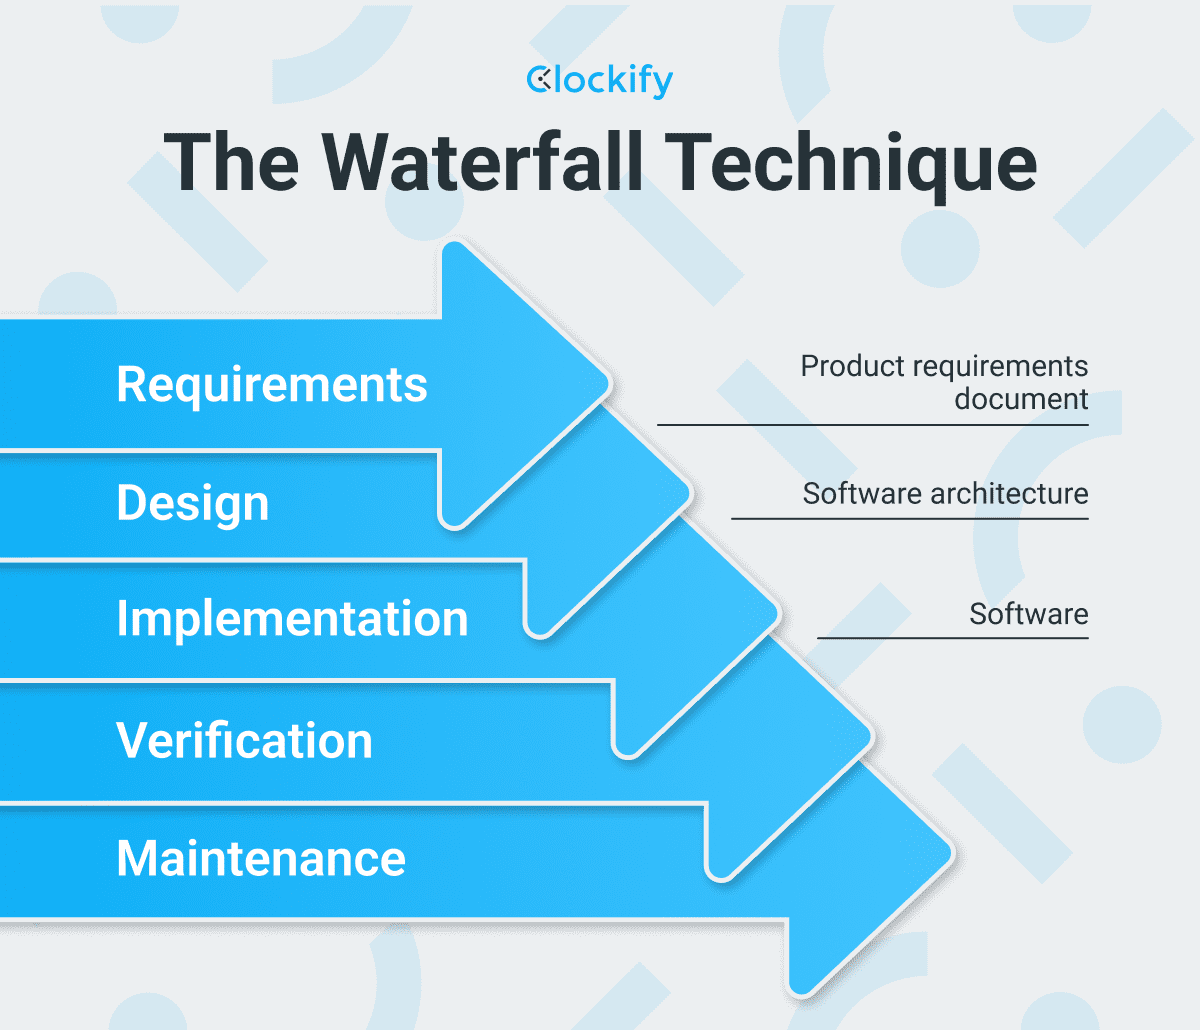 The Waterfall Technique